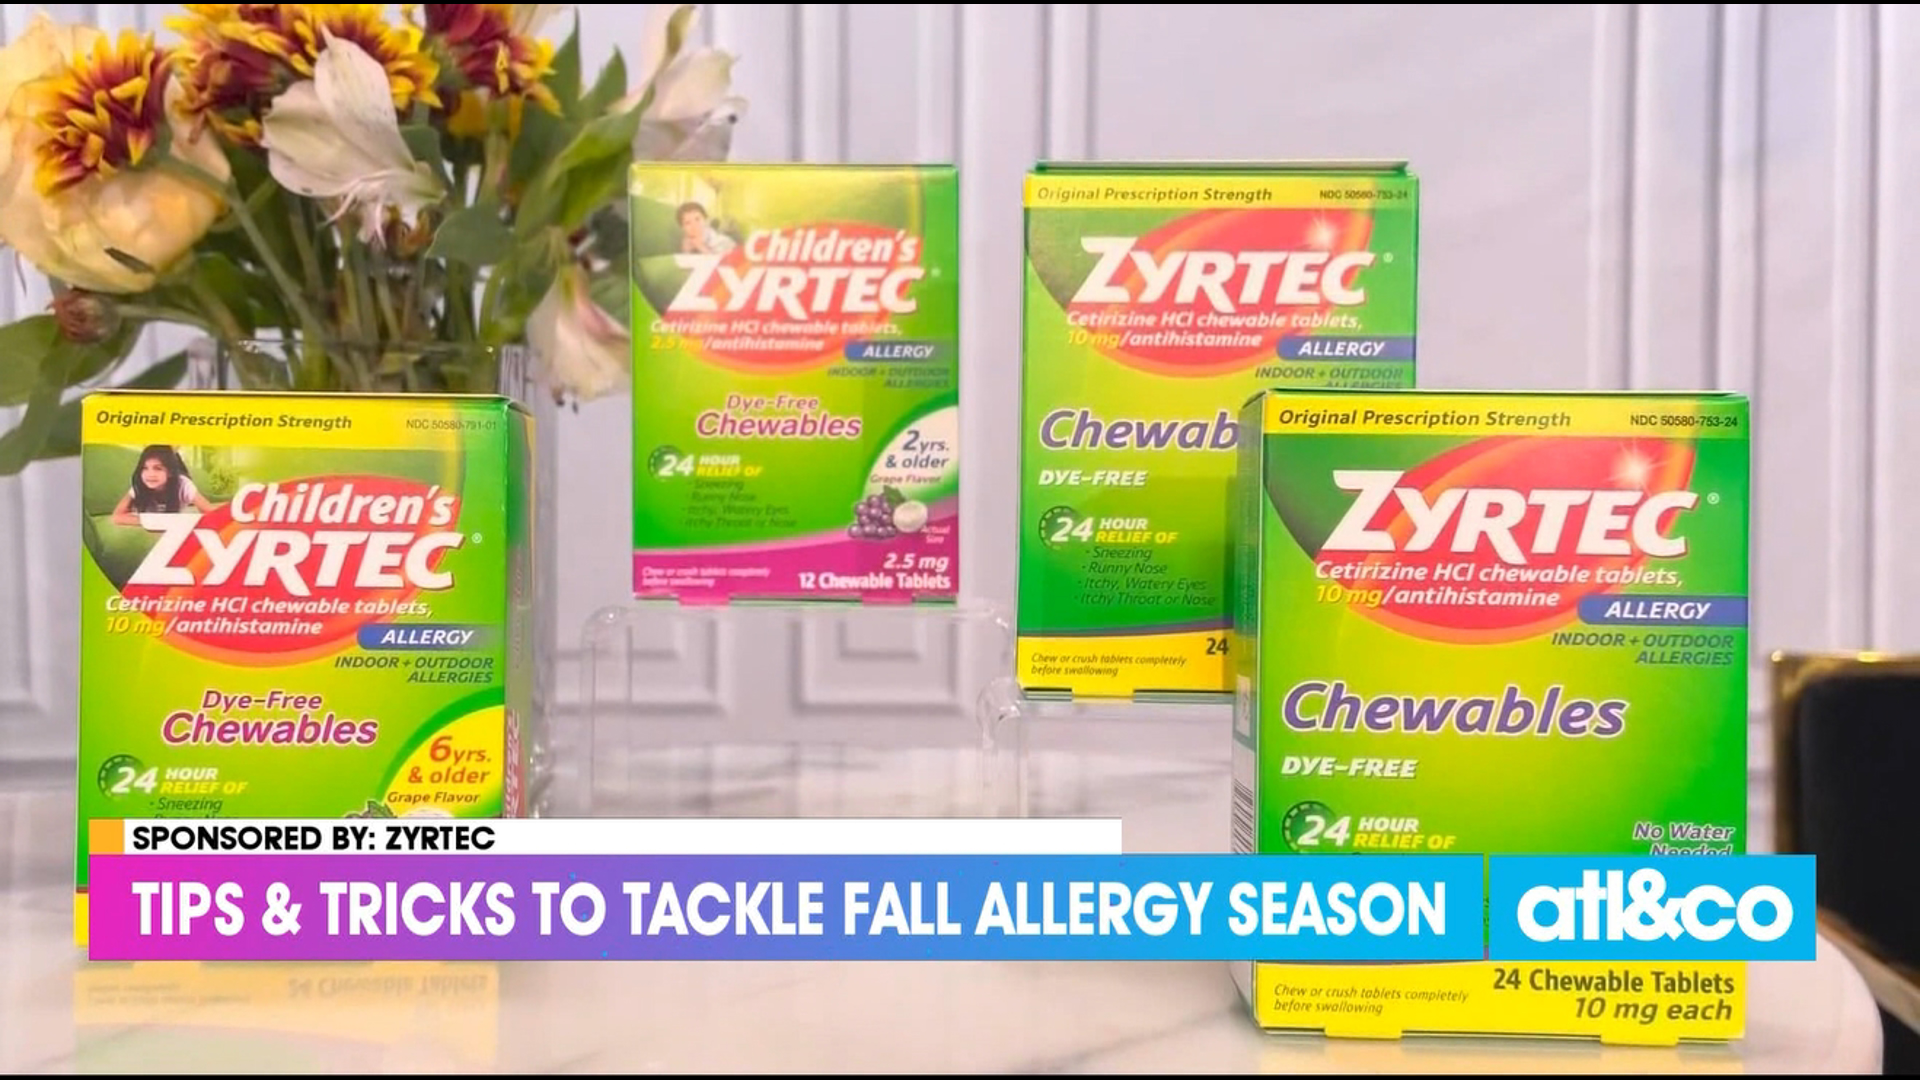 Get top tips and tricks from Zyrtec to tackle those pesky fall allergies.